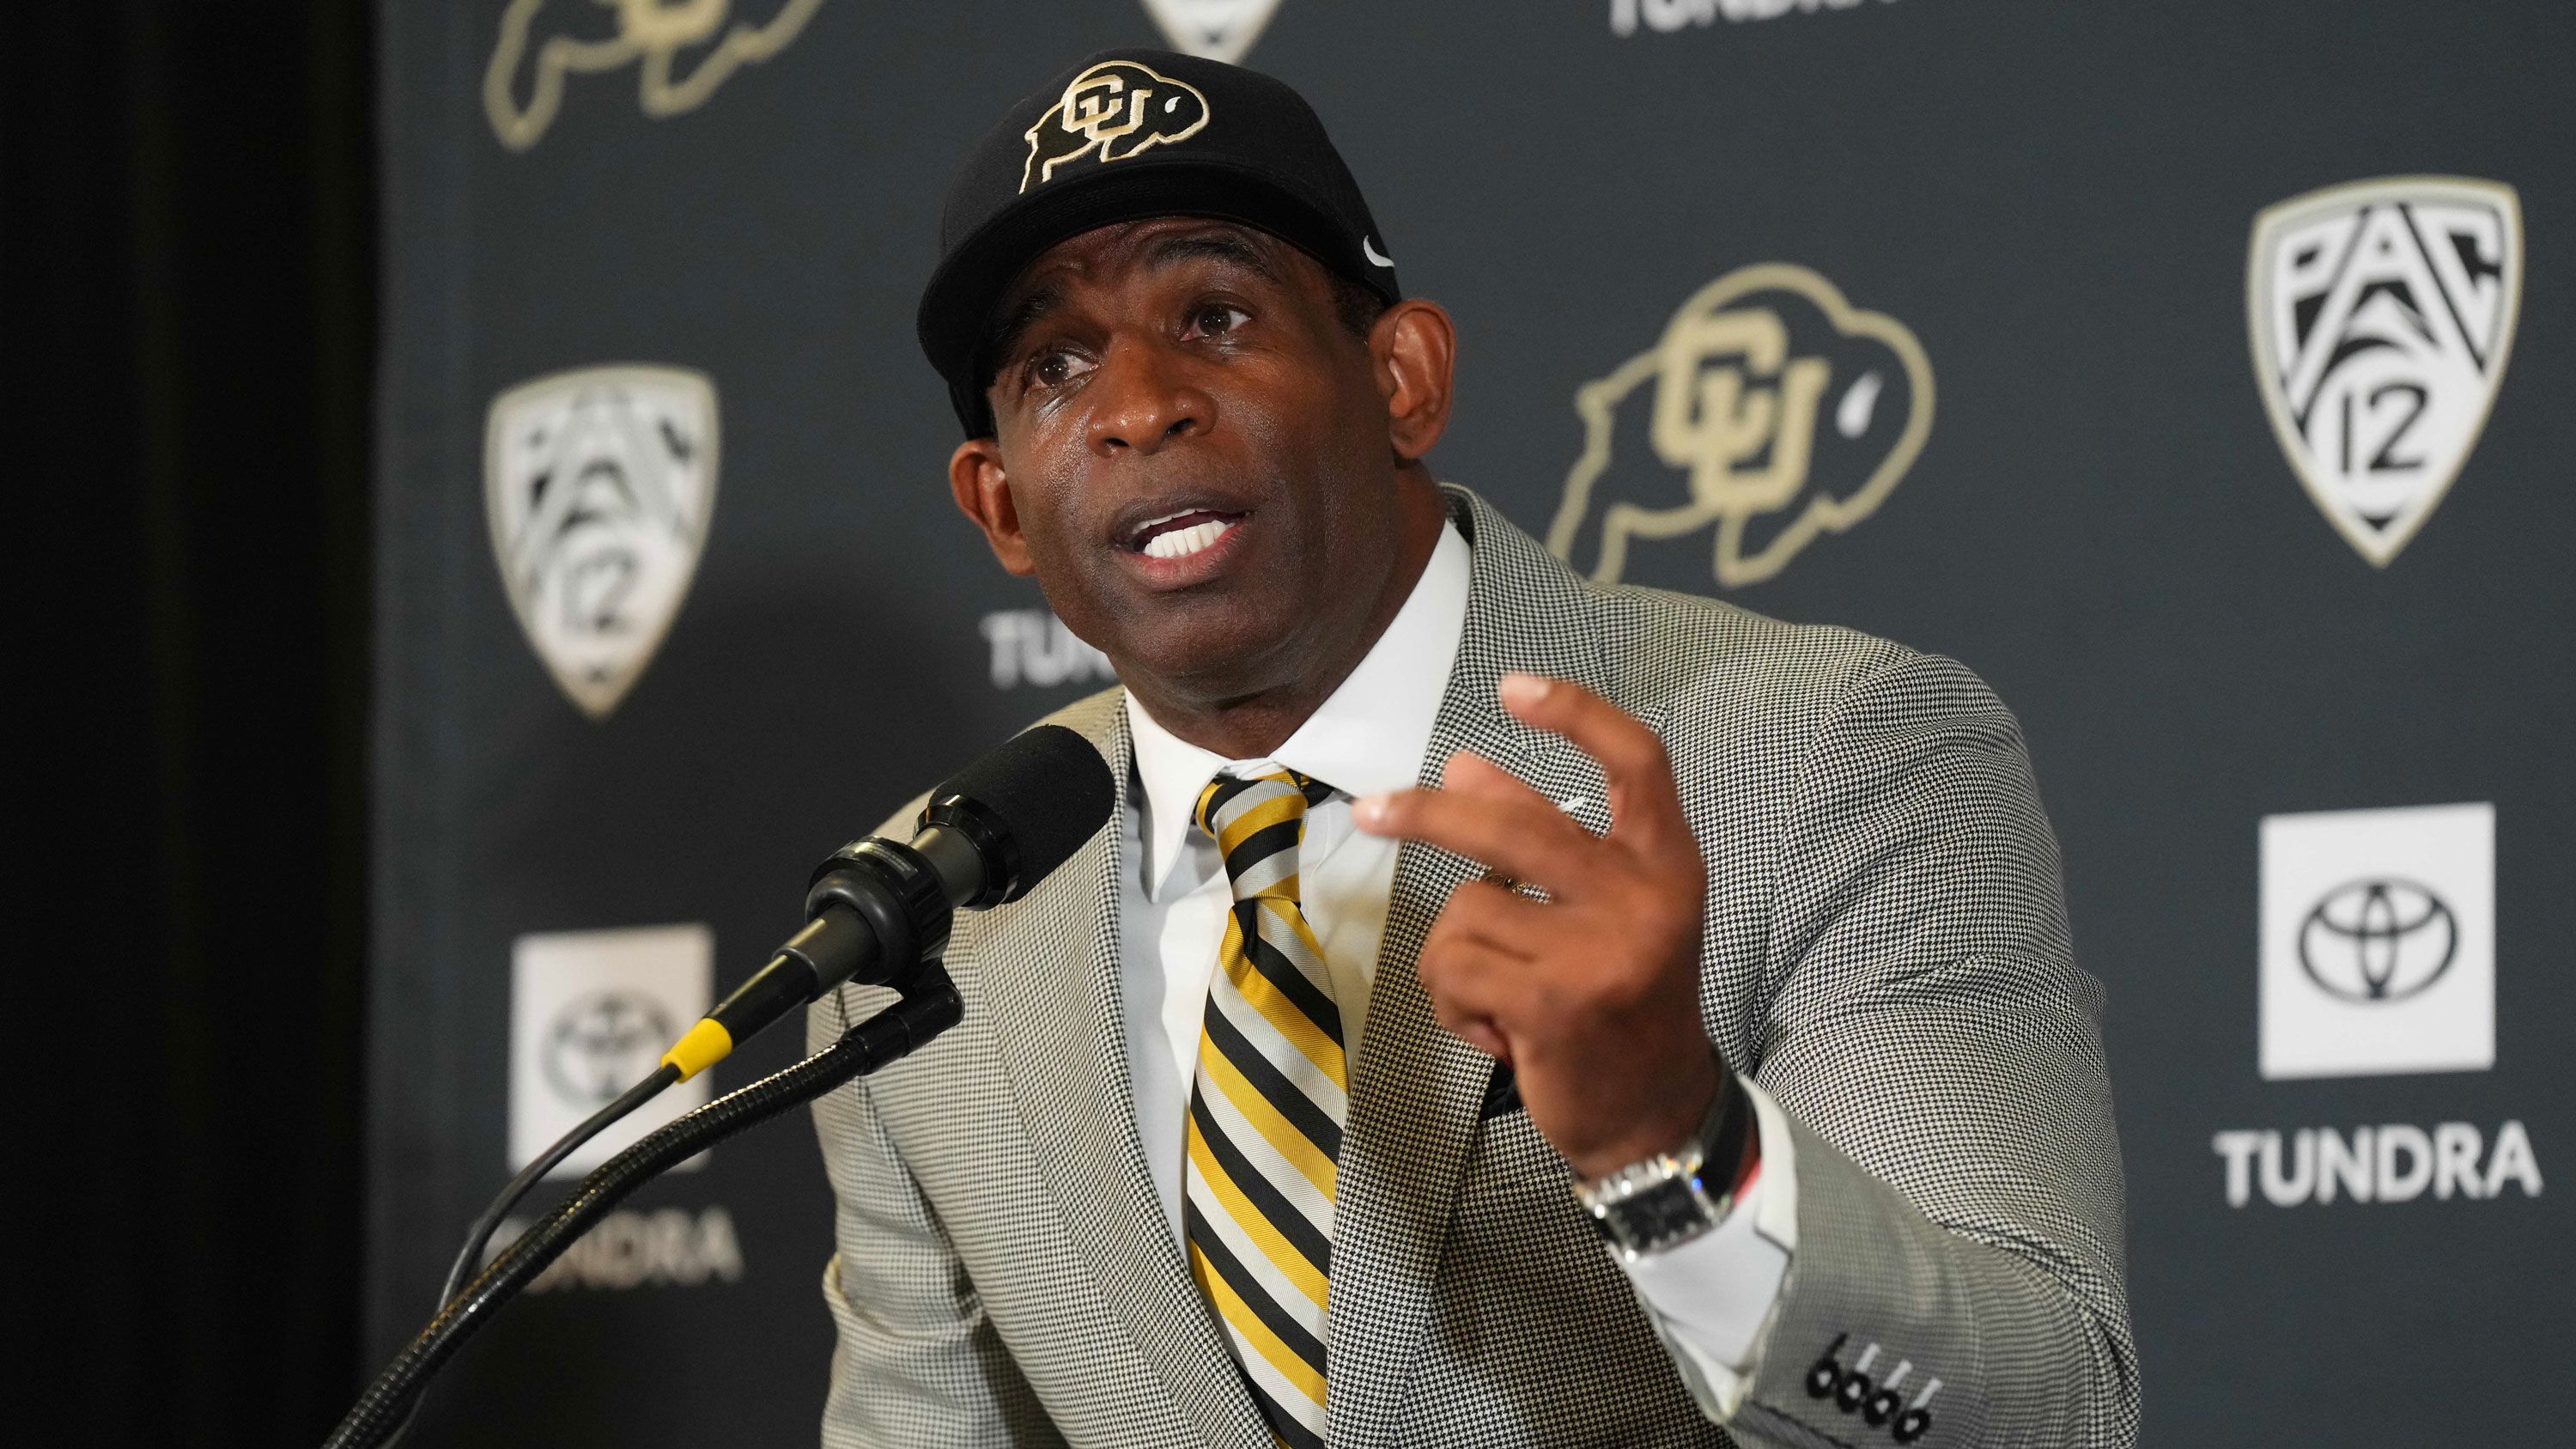 What happened to Deion Sanders? Update on his health and injuries